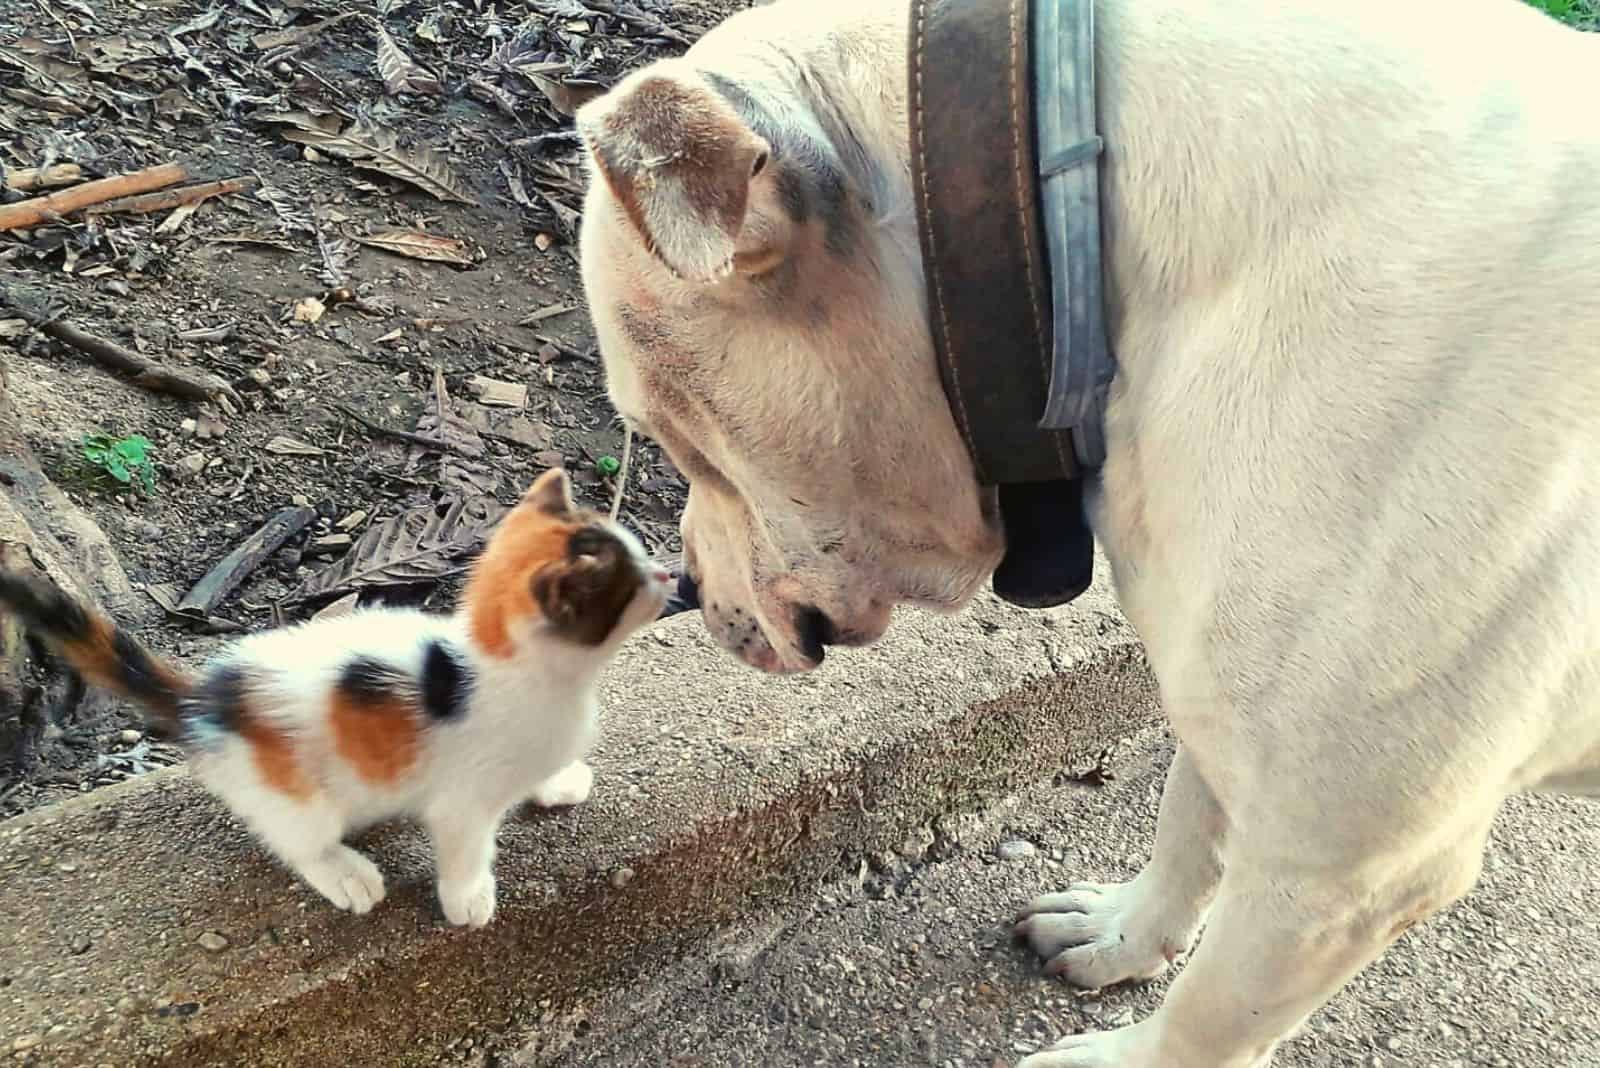 a kiss between small calico kitten and a dog